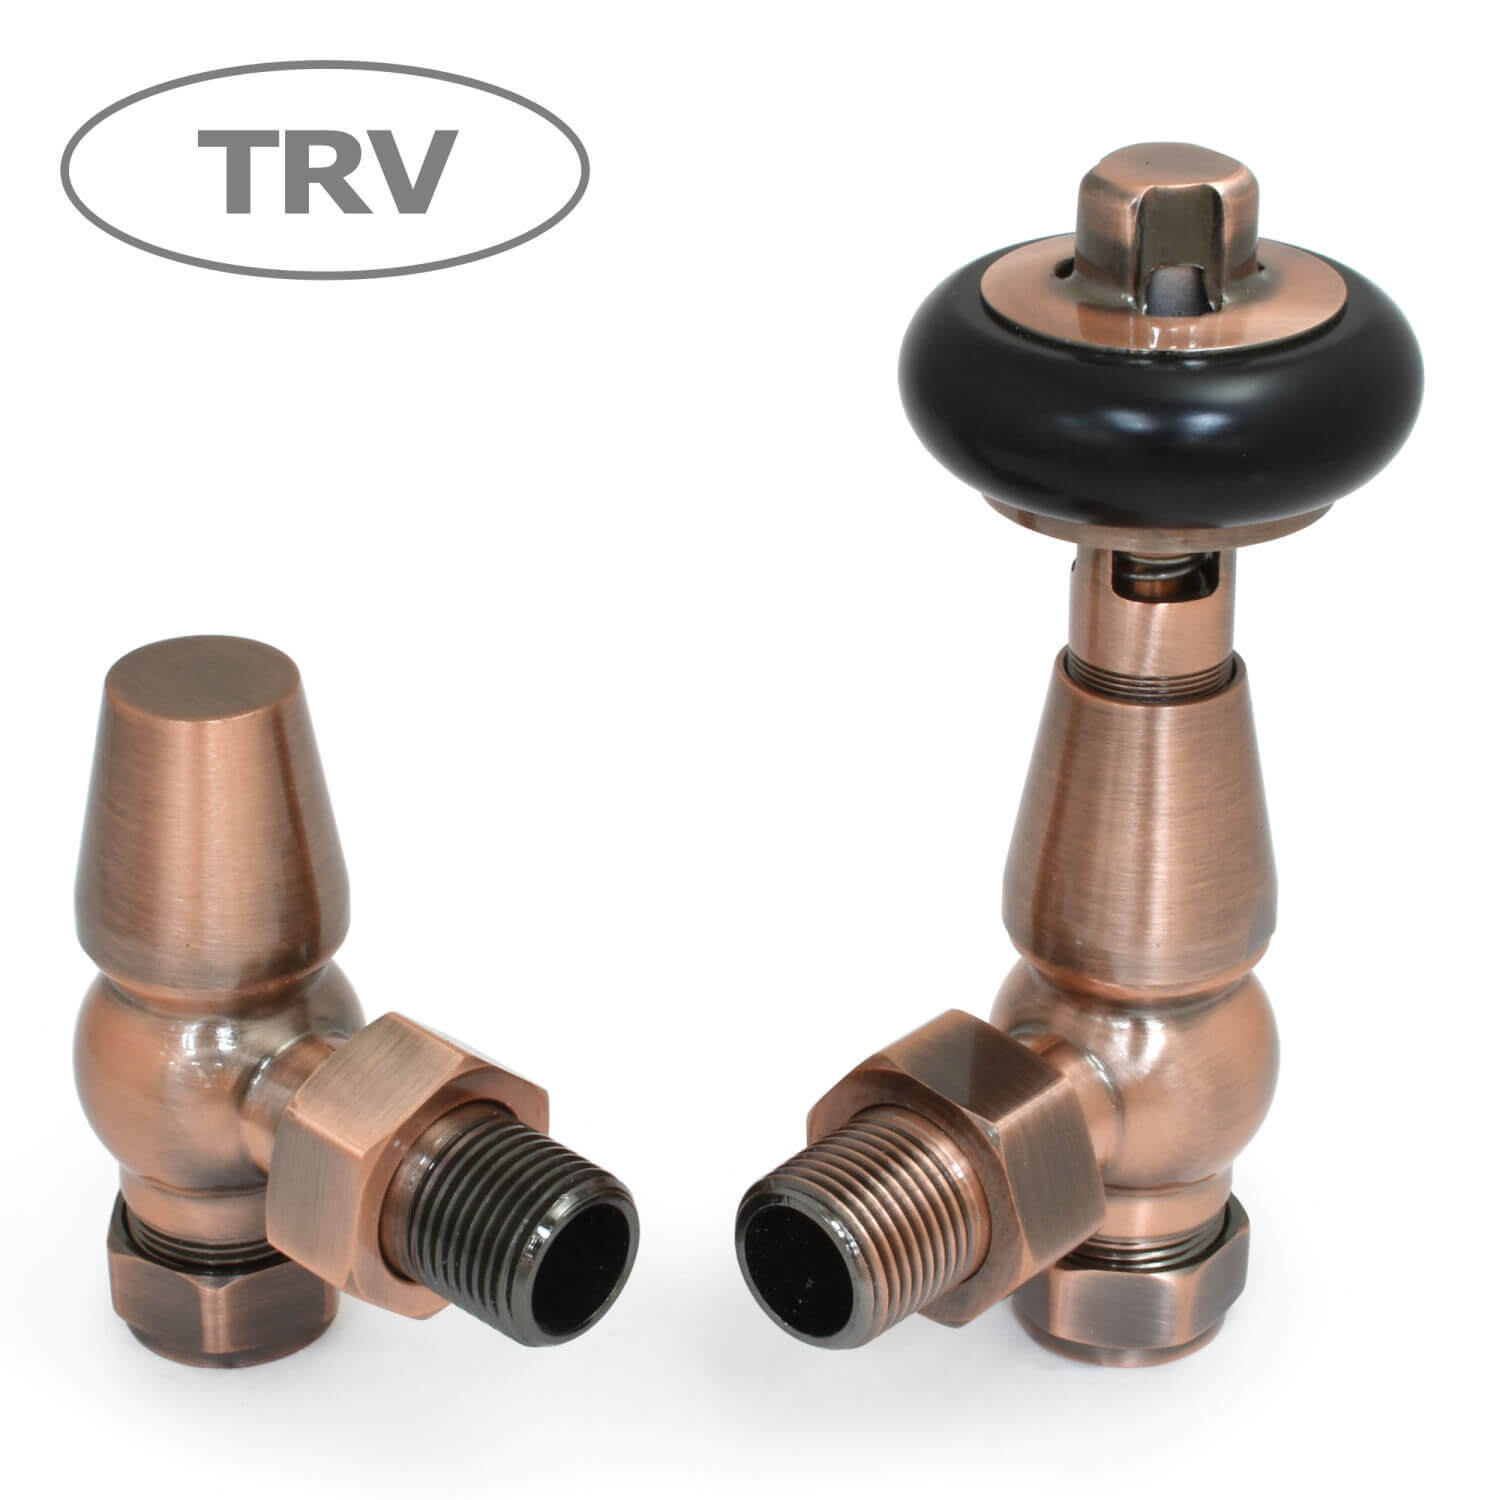 dq-enzo-TRV-angled-antique copper